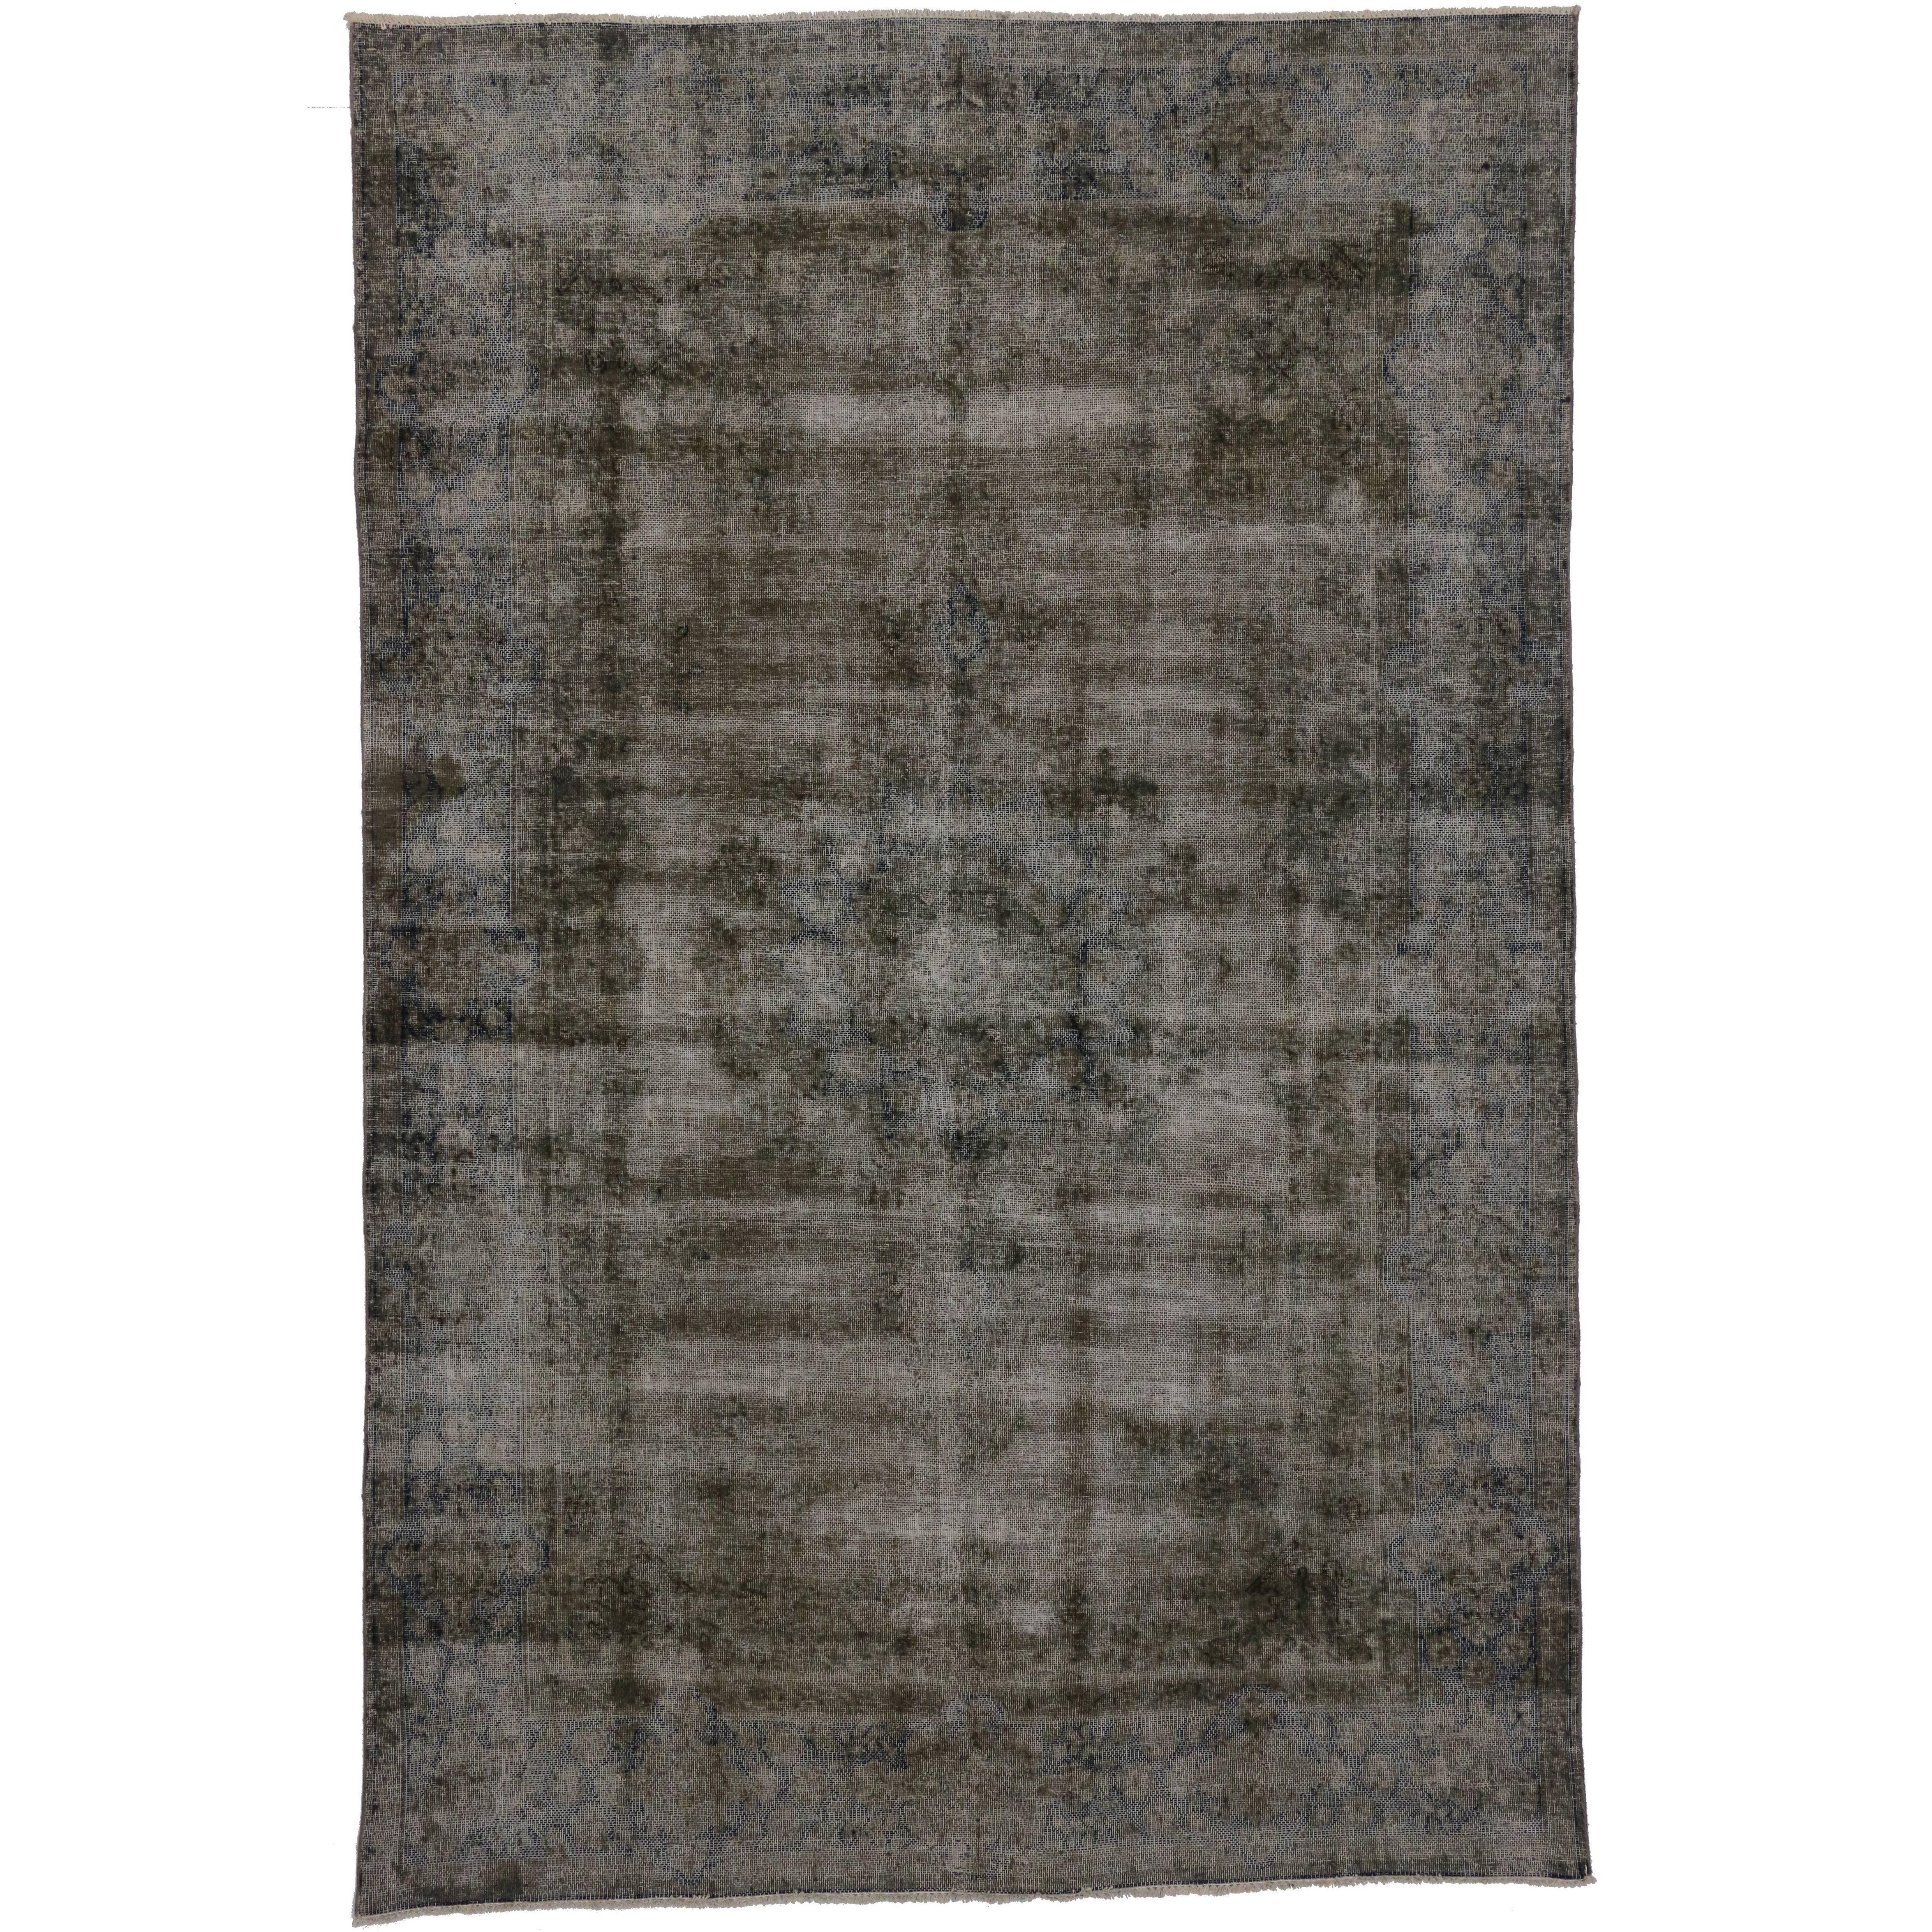 Dark Brown Distressed Vintage Persian Rug with Rustic Industrial Luxe Style For Sale